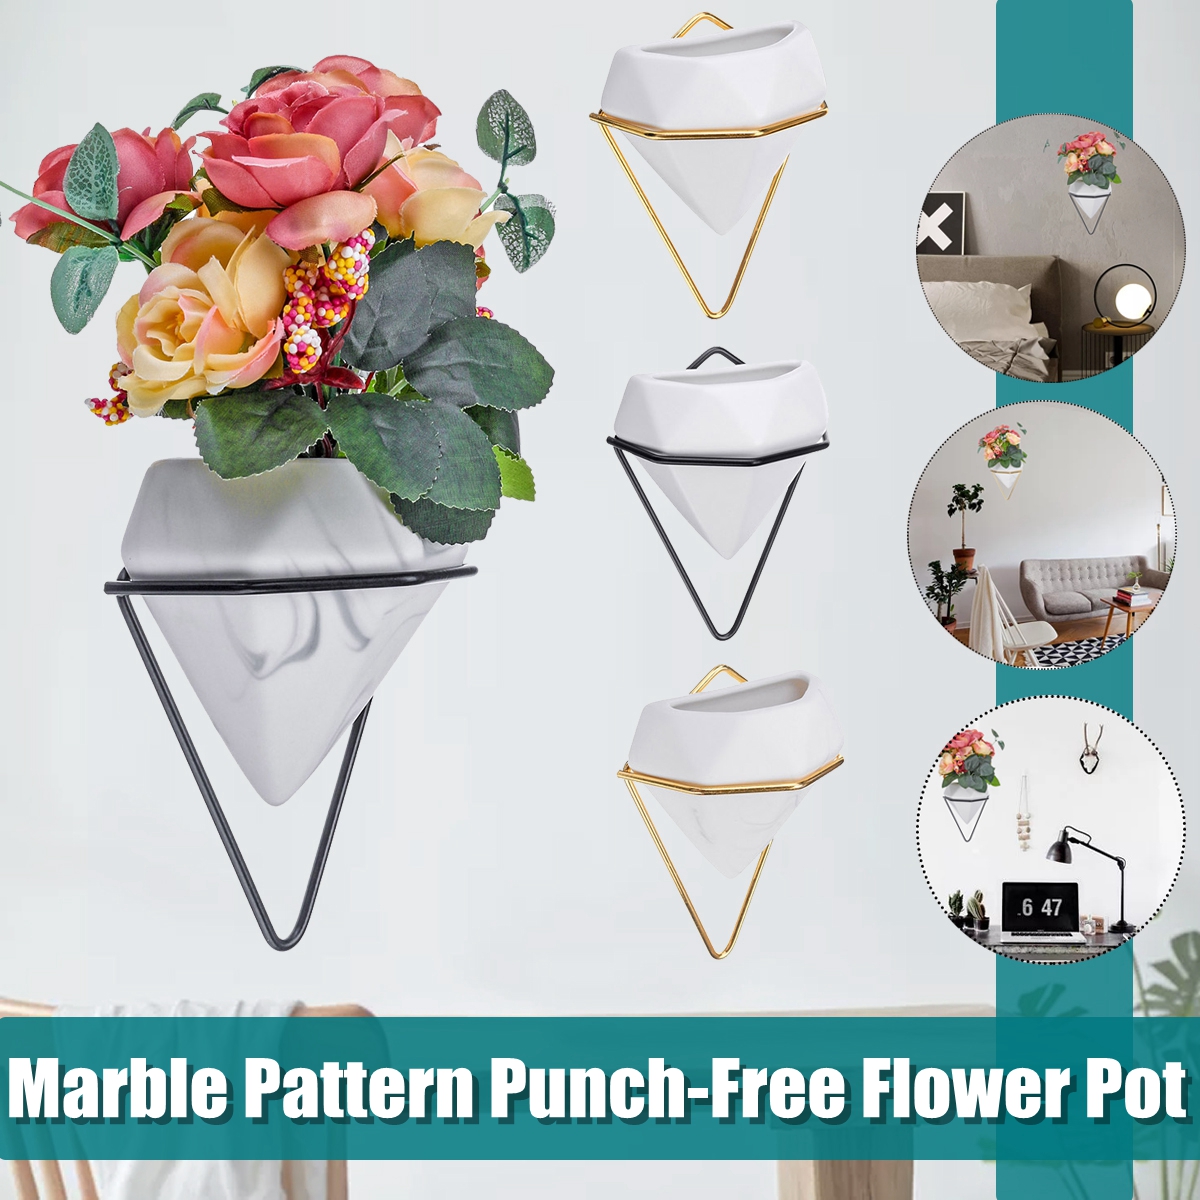 Marble-Pattern-Wall-Mounted-Flower-Pots-Creative-Hanging-Plant-Flower-Pot-1707565-1